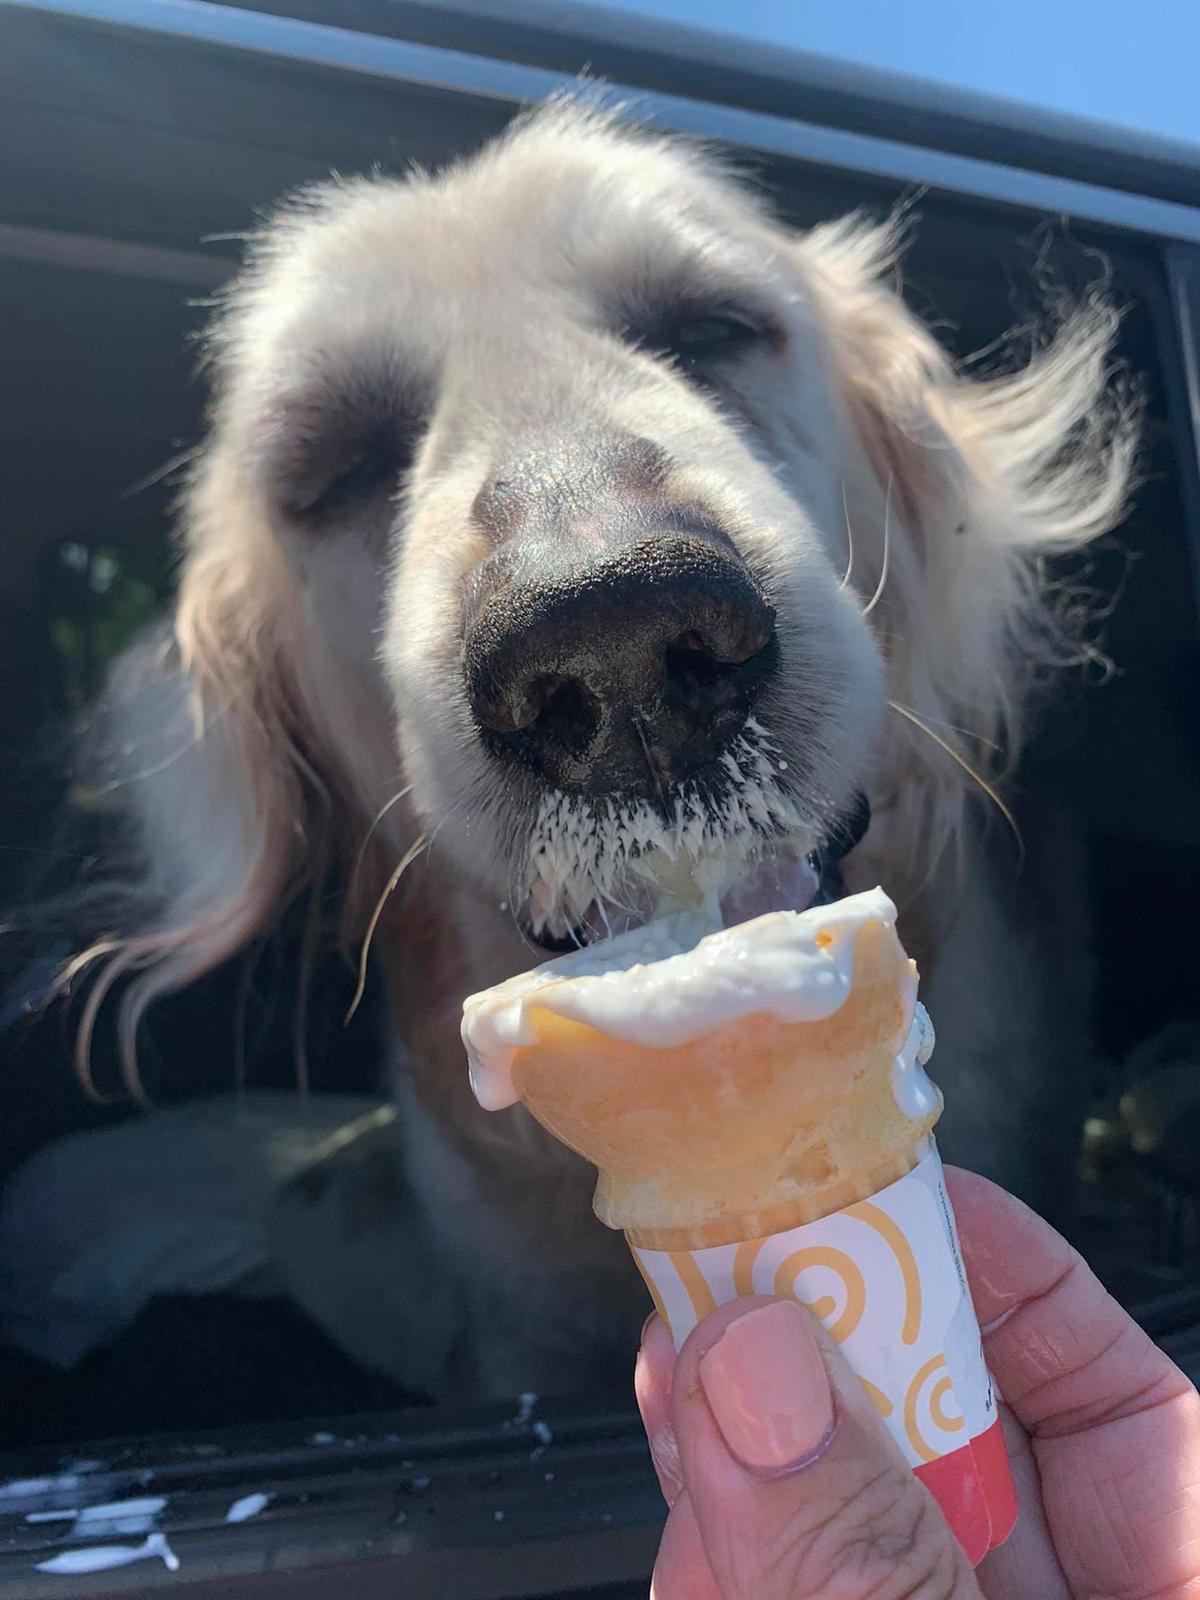 Theo trying ice cream for the first time. (Caters News)